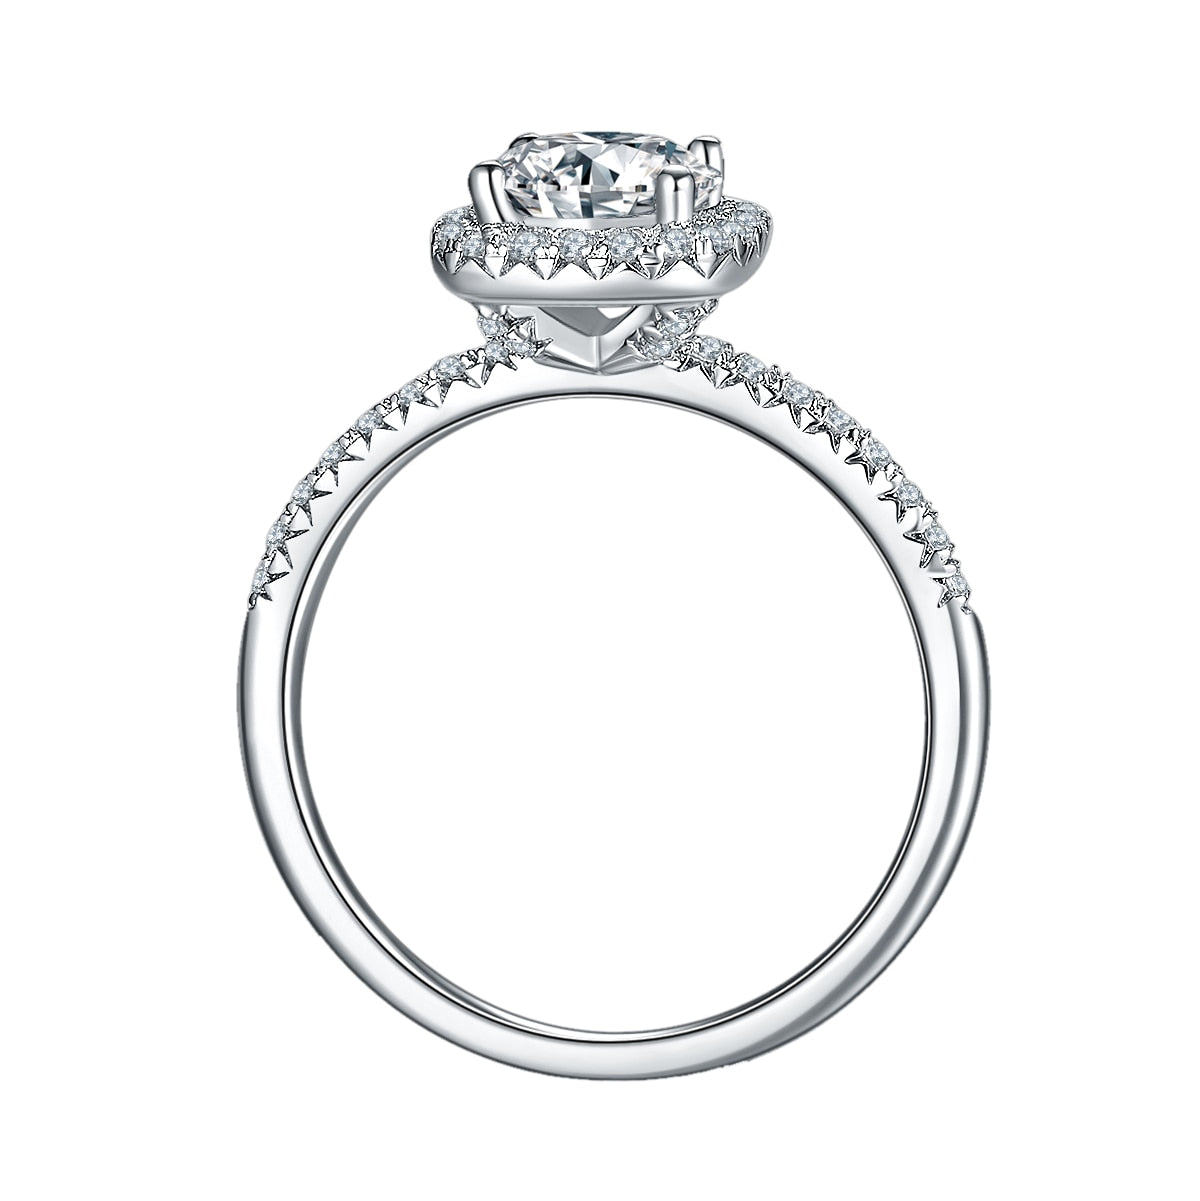 A silver squared halo engagement ring with pave band.